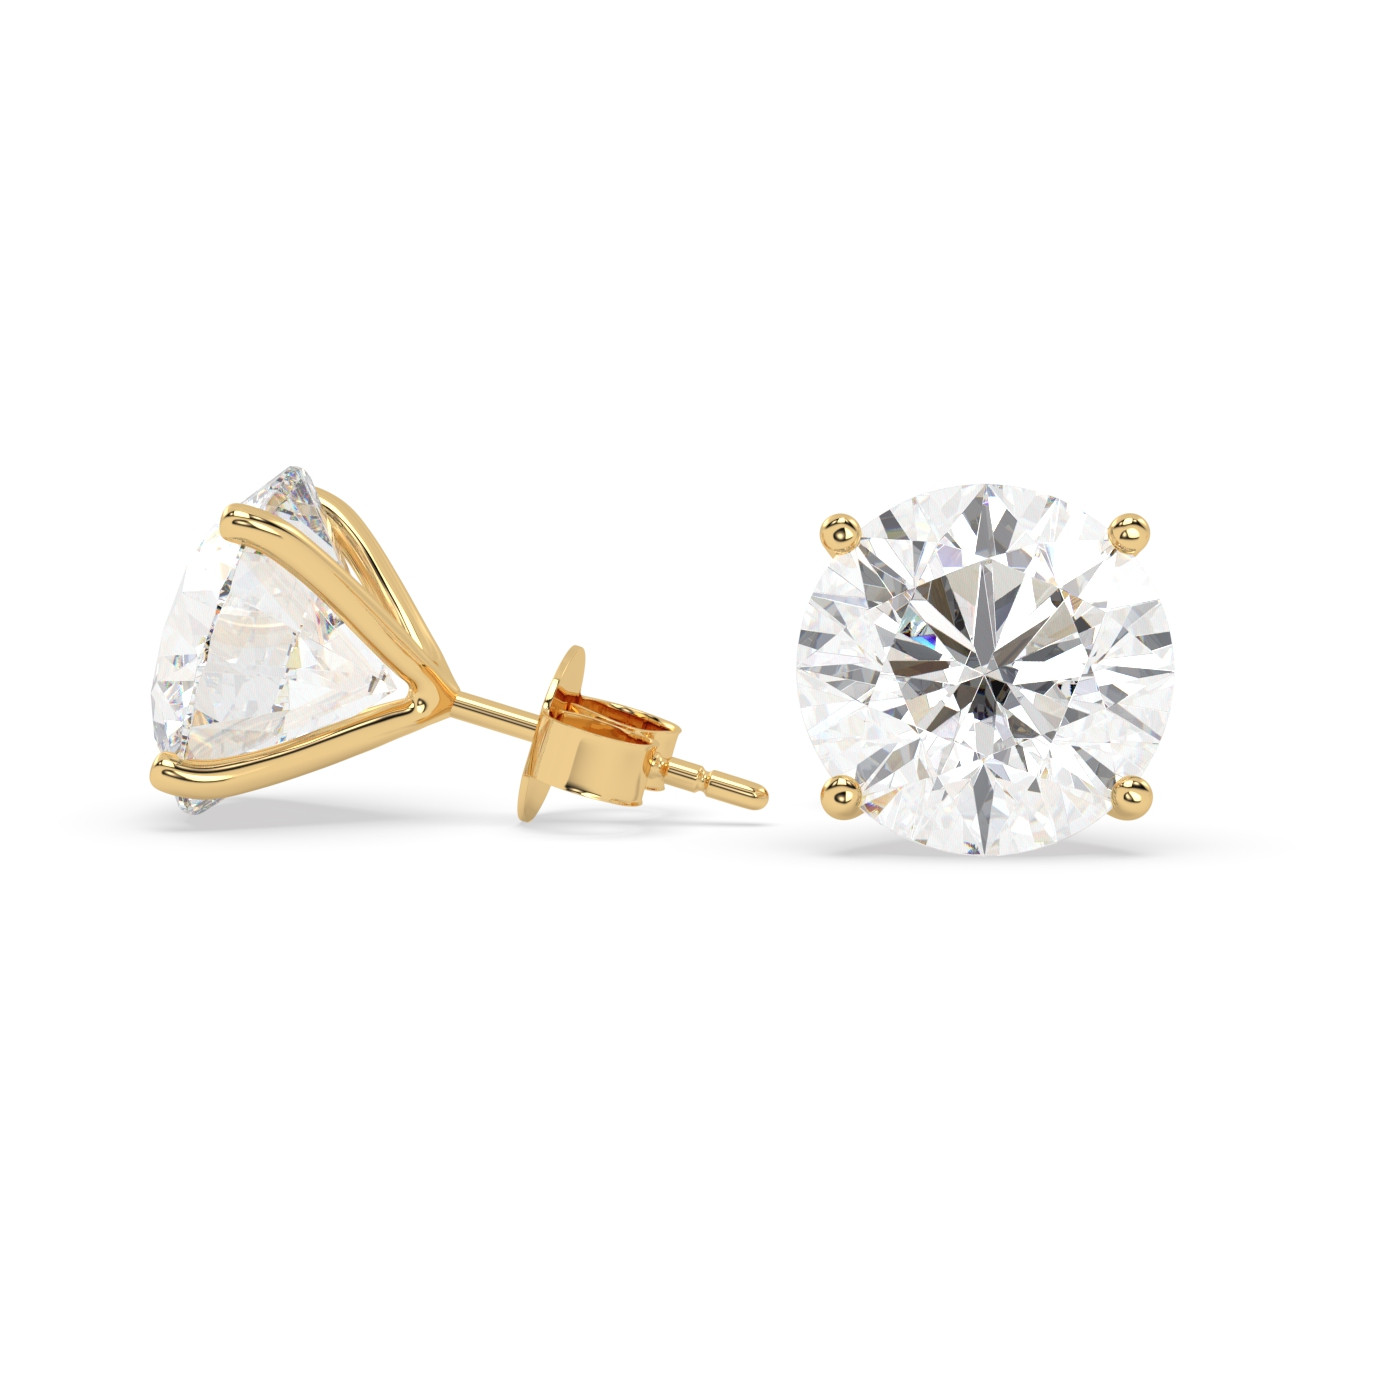 18K YELLOW GOLD Round Stud Earrings with butterfly back